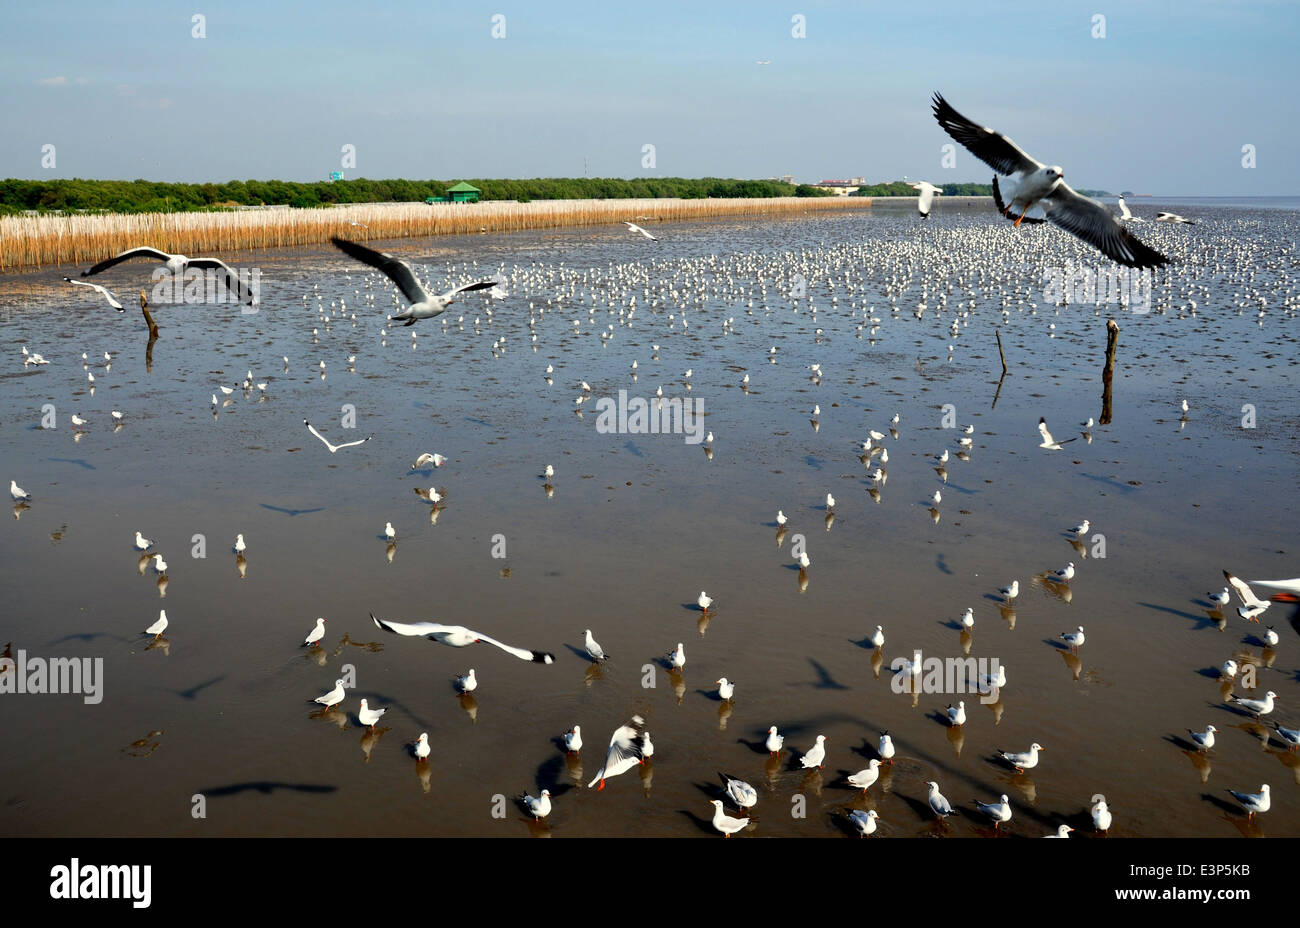 Samut Prakan, Thailand: Thousands of seagulls dwell in the shallow waters of the Gulf of Siam Stock Photo